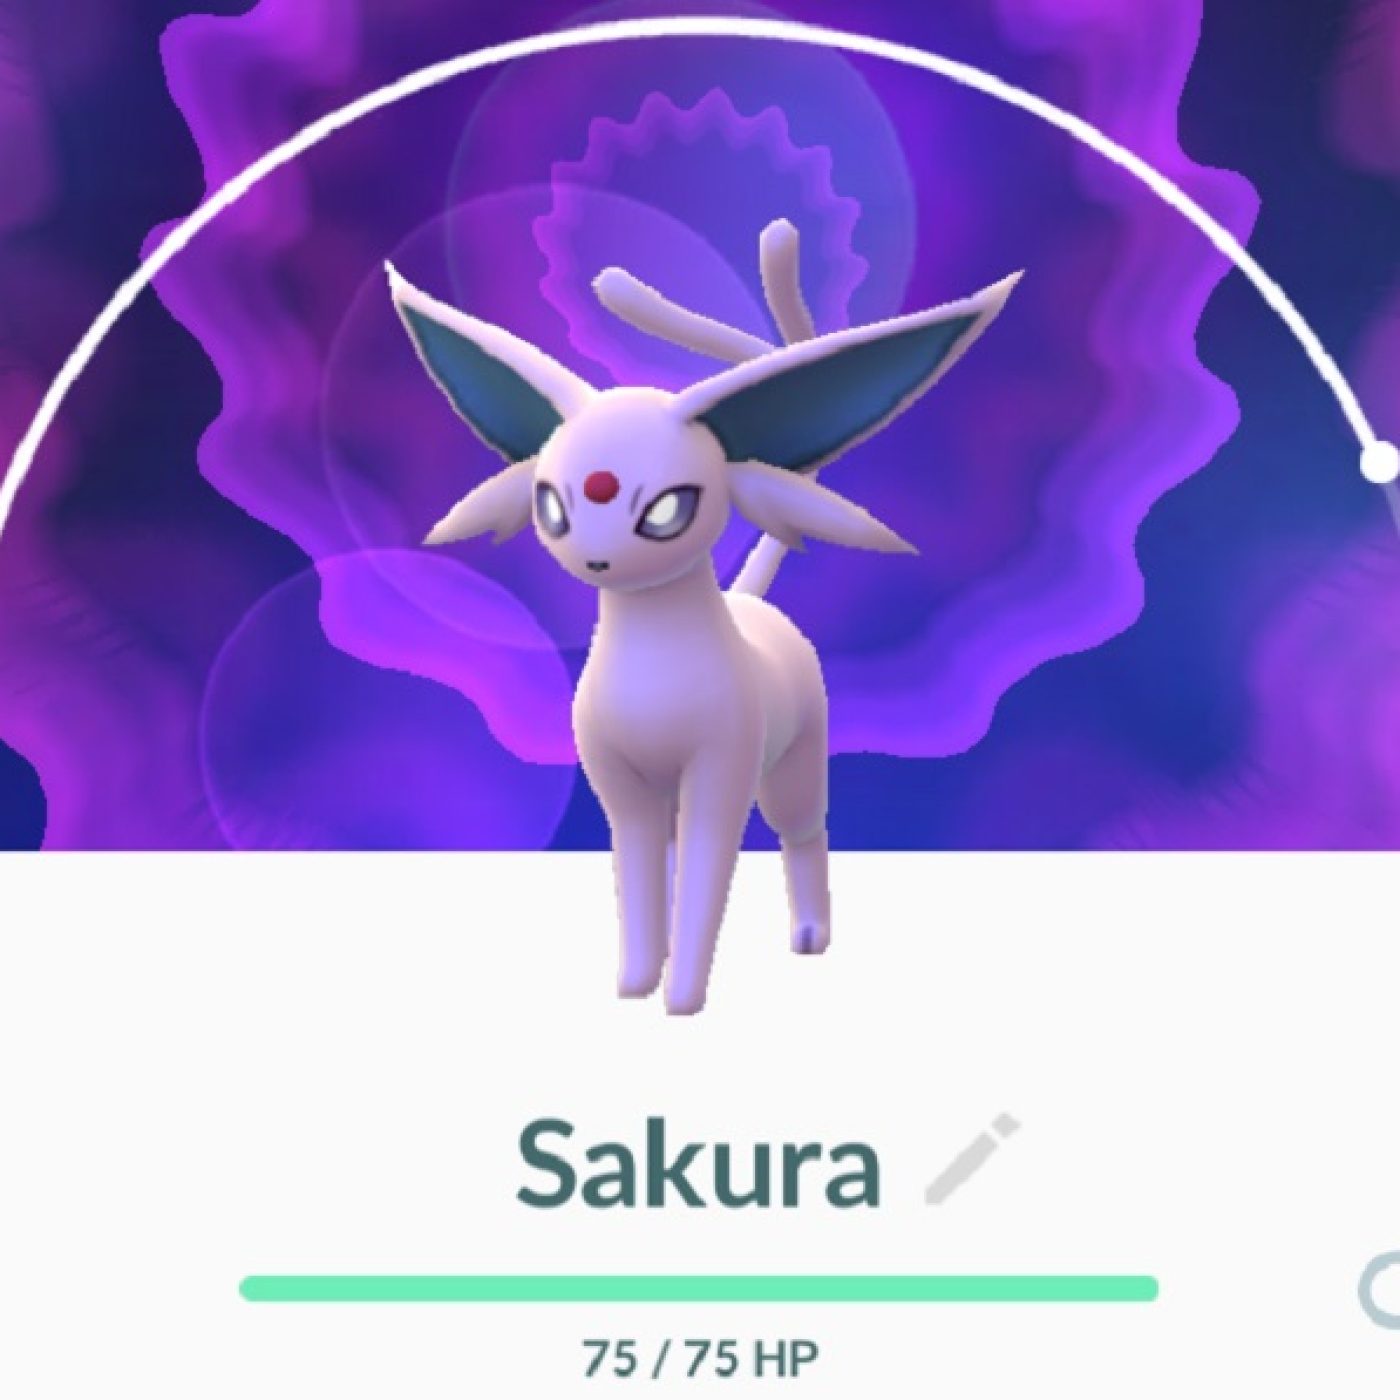 I named my eevee to evolve it into umbreon, but the evolution button still  has a question mark, will it evolve into umbreon if I press evolve? :  r/pokemongo